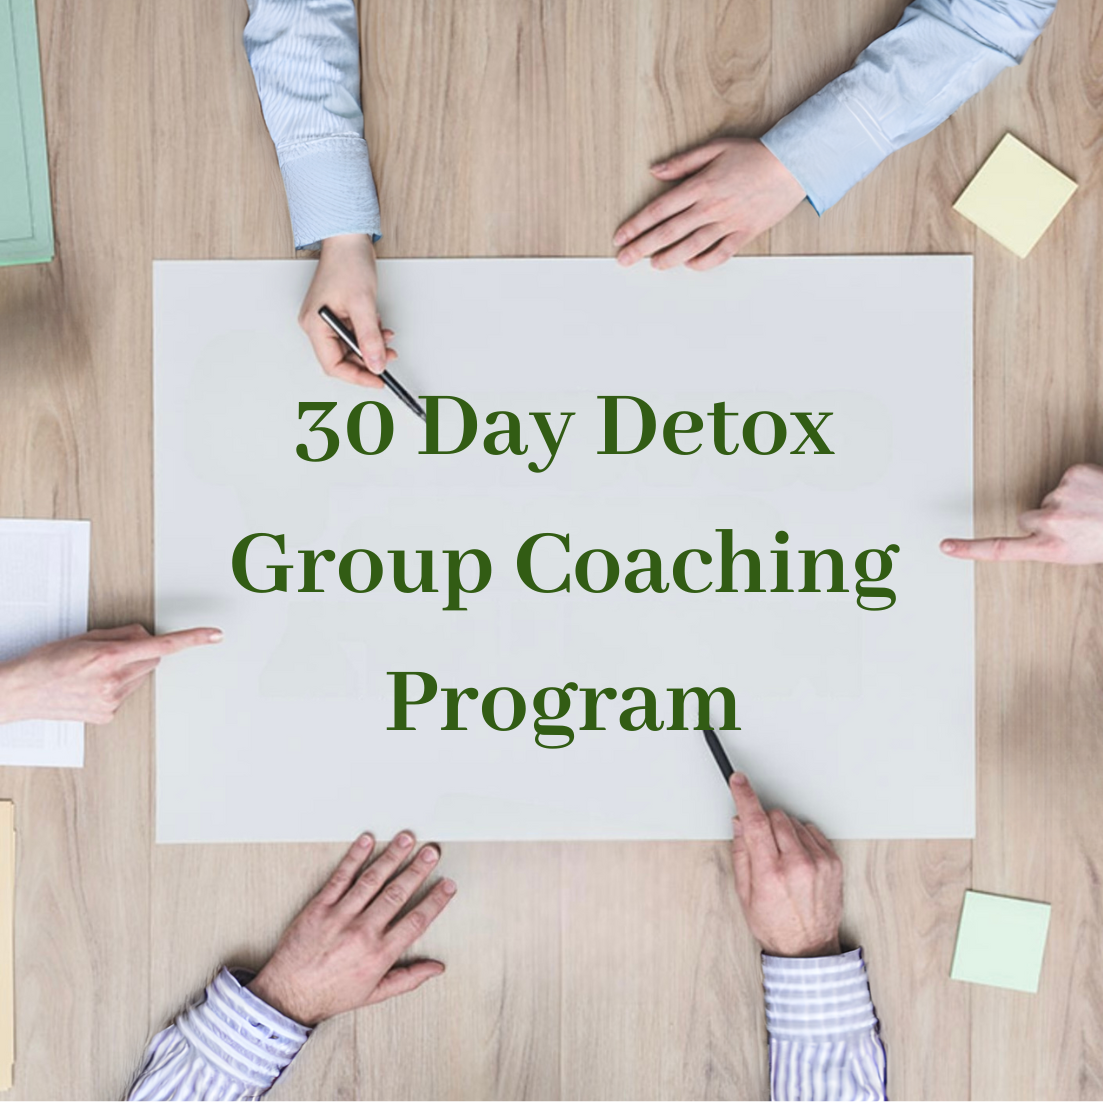 Detox Group Coaching Daily Benefit,Other Supplements Dr. Morrison Daily Benefit   